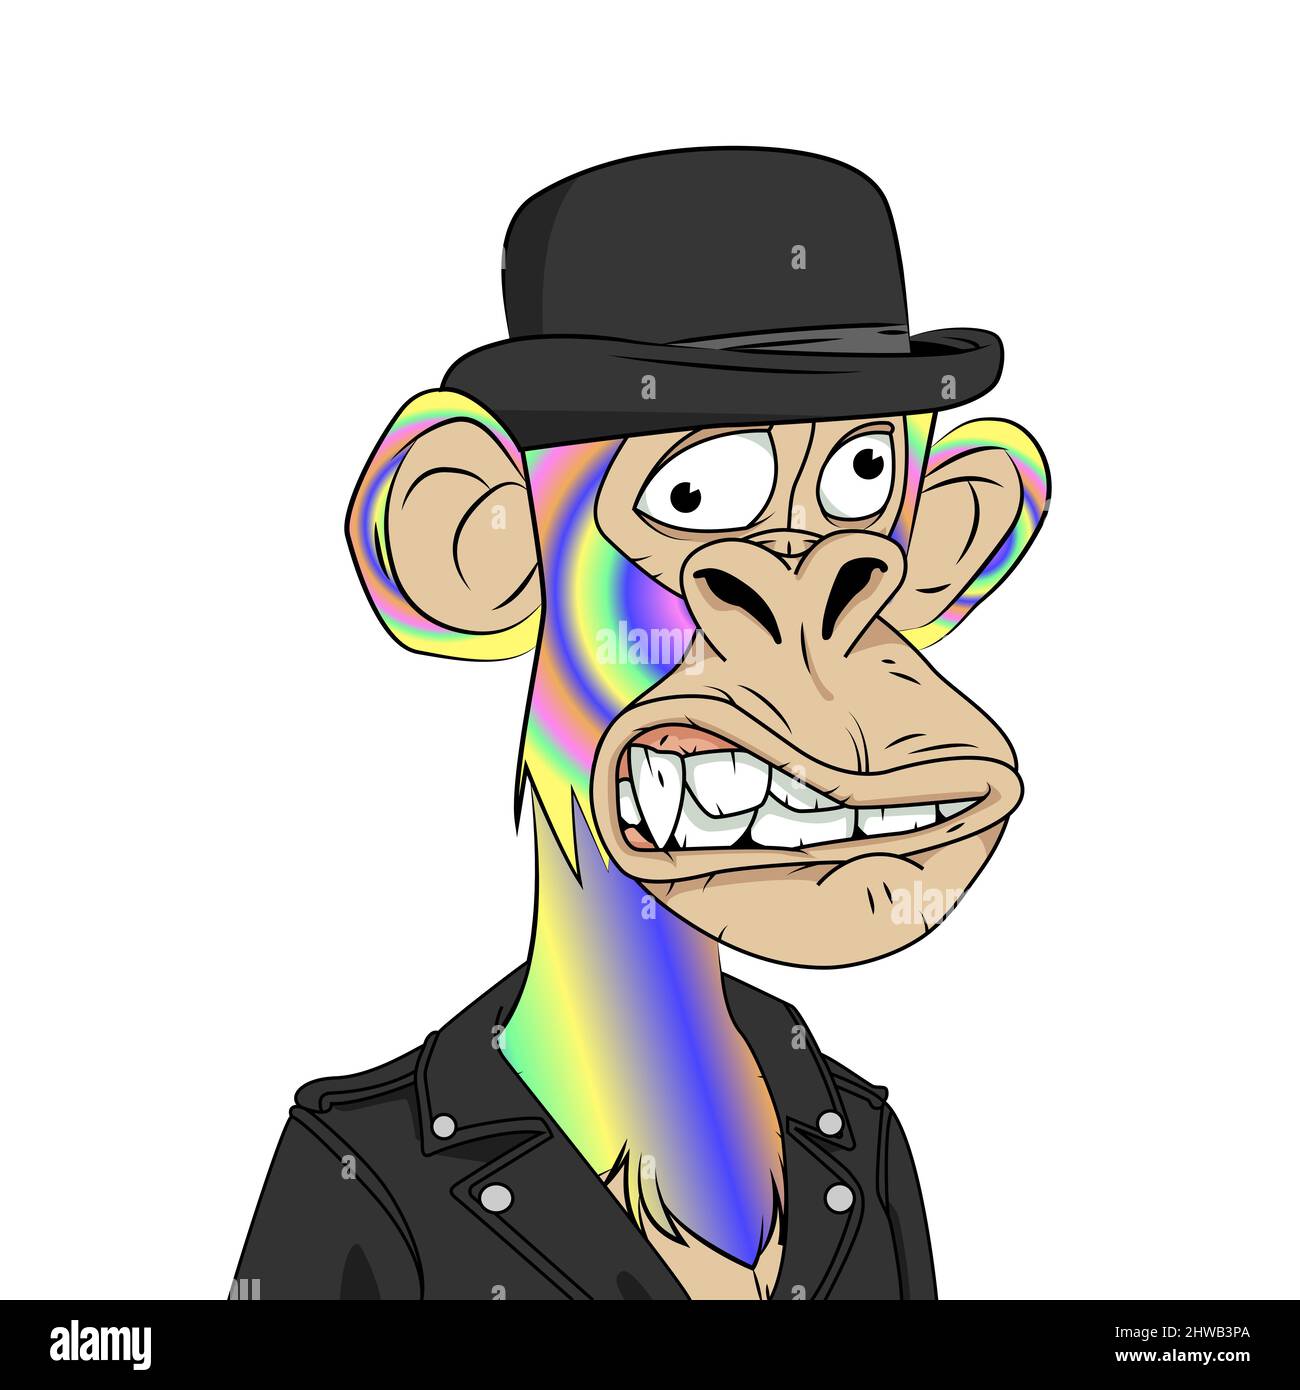 Bored ape yacht club rare NFT artwork. Trippy monkey with crazy expression hat and leather jacket costume. Crypto graphic flat vector illustration. Stock Vector